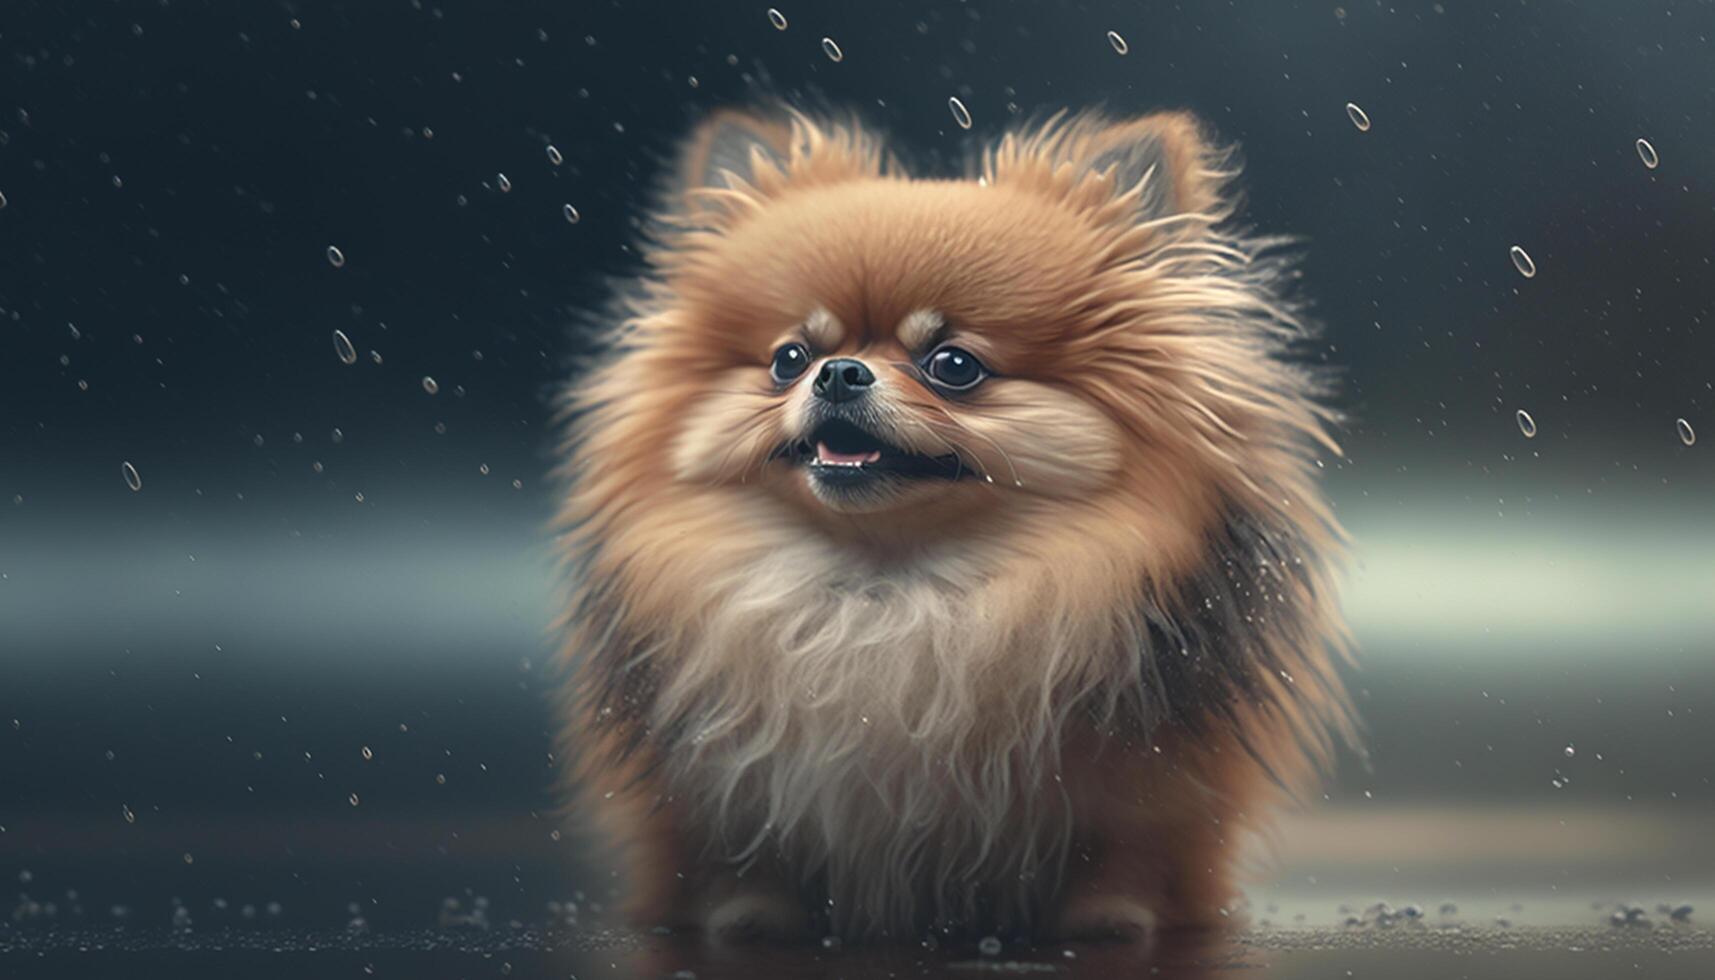 A Sweet Pomeranian Dog Sitting in the Rain, Shaking Off the Raindrops photo